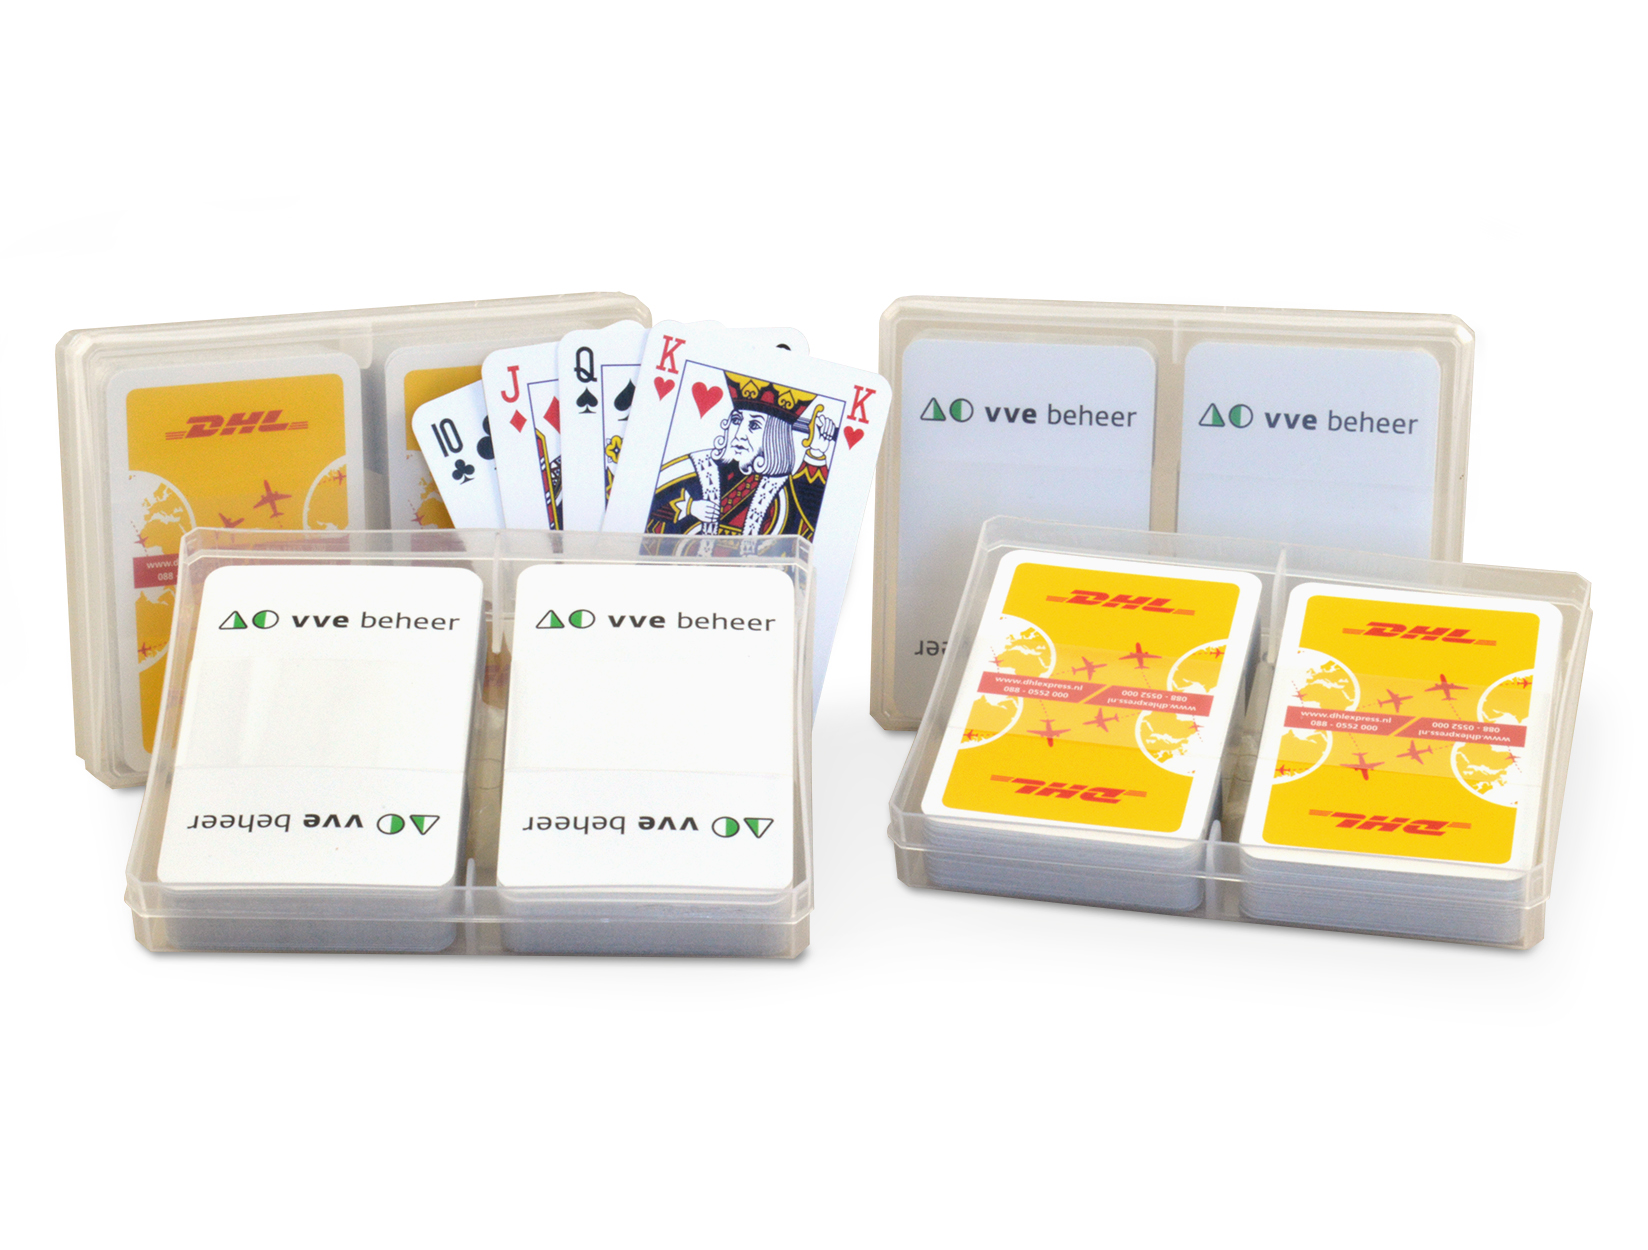 Set of 2 personalized decks of cards in a plastic box - JCA10